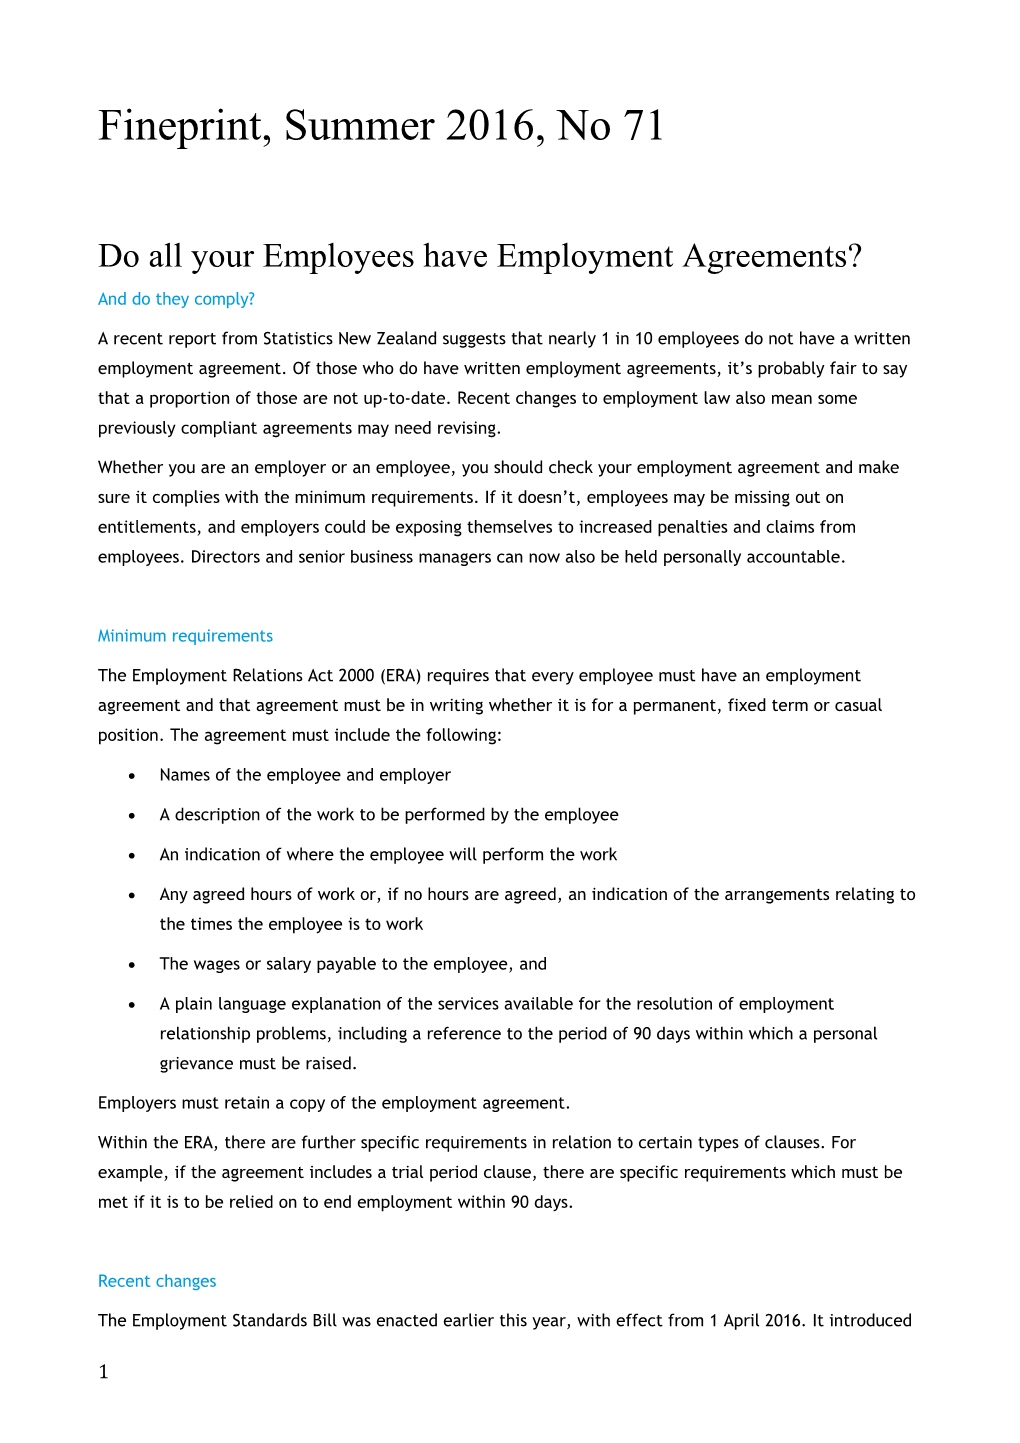 Do All Your Employees Have Employment Agreements?